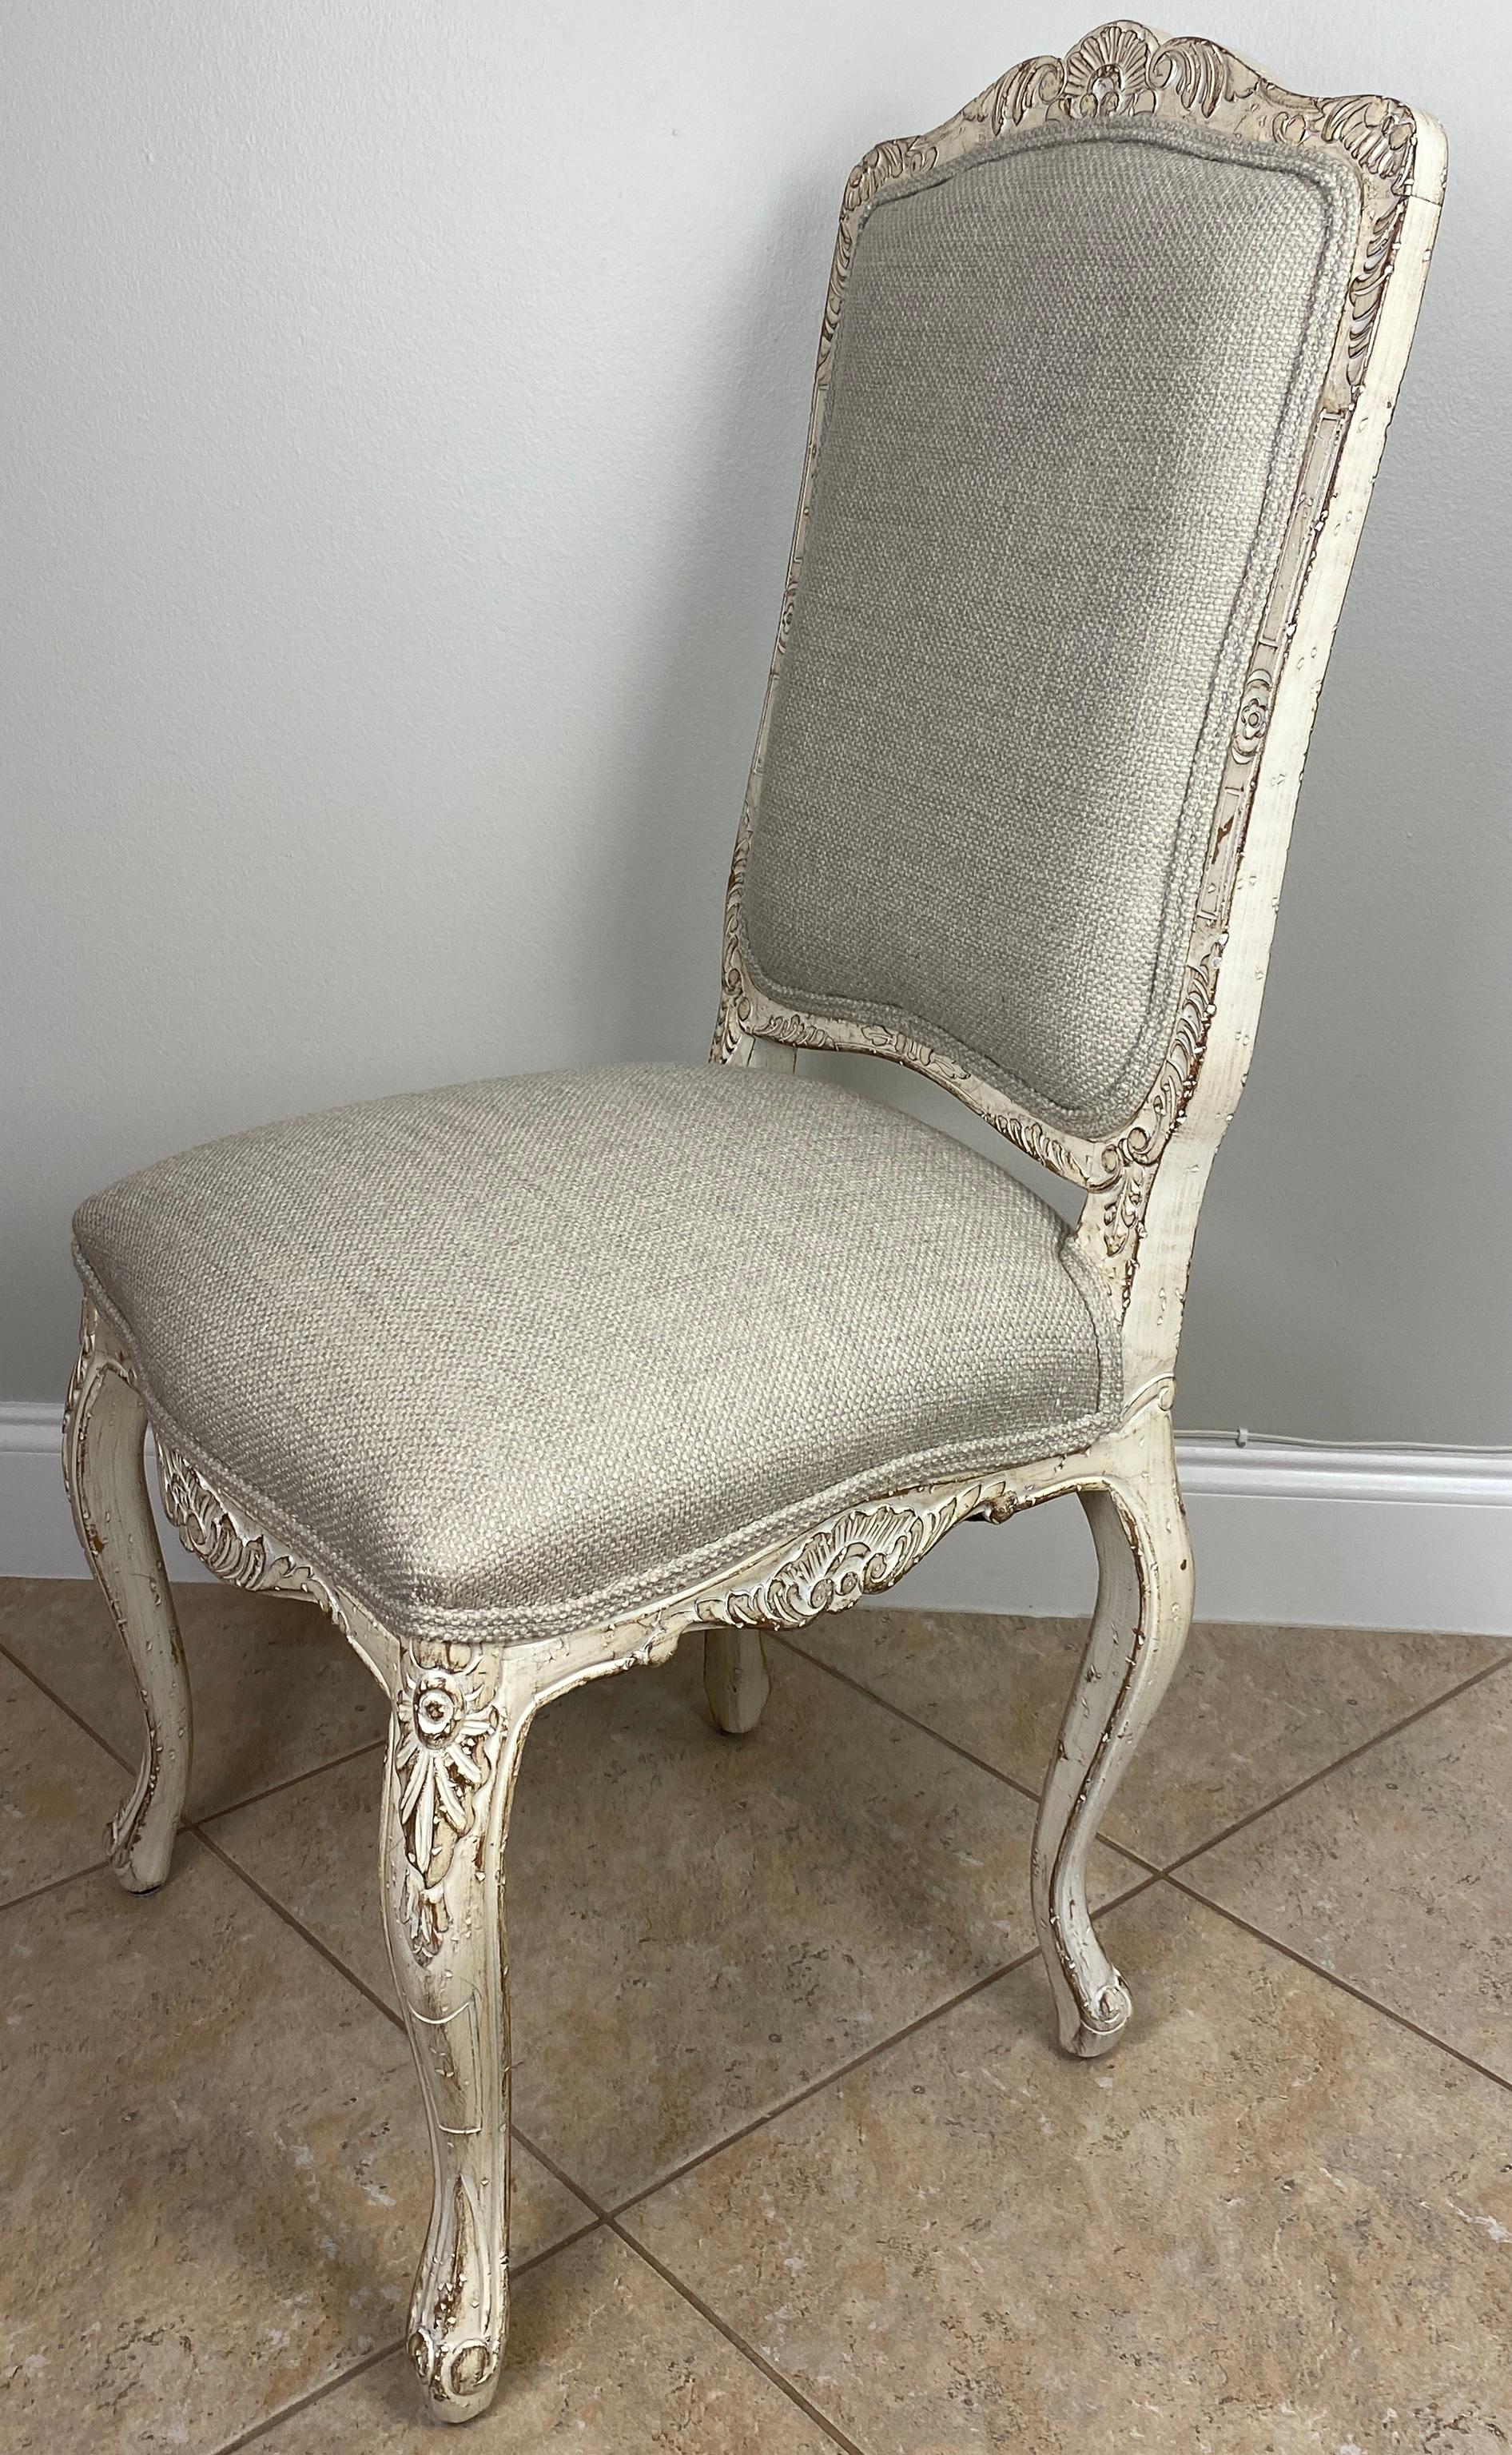 A very good quality set of four comfortable and sturdy French Louis XV style dining chairs in a pleasing antiqued beige finish. Newly reupholstered with a neutral fabric. 

The well crafted Louis XV style wood frames are hand carved. These dining